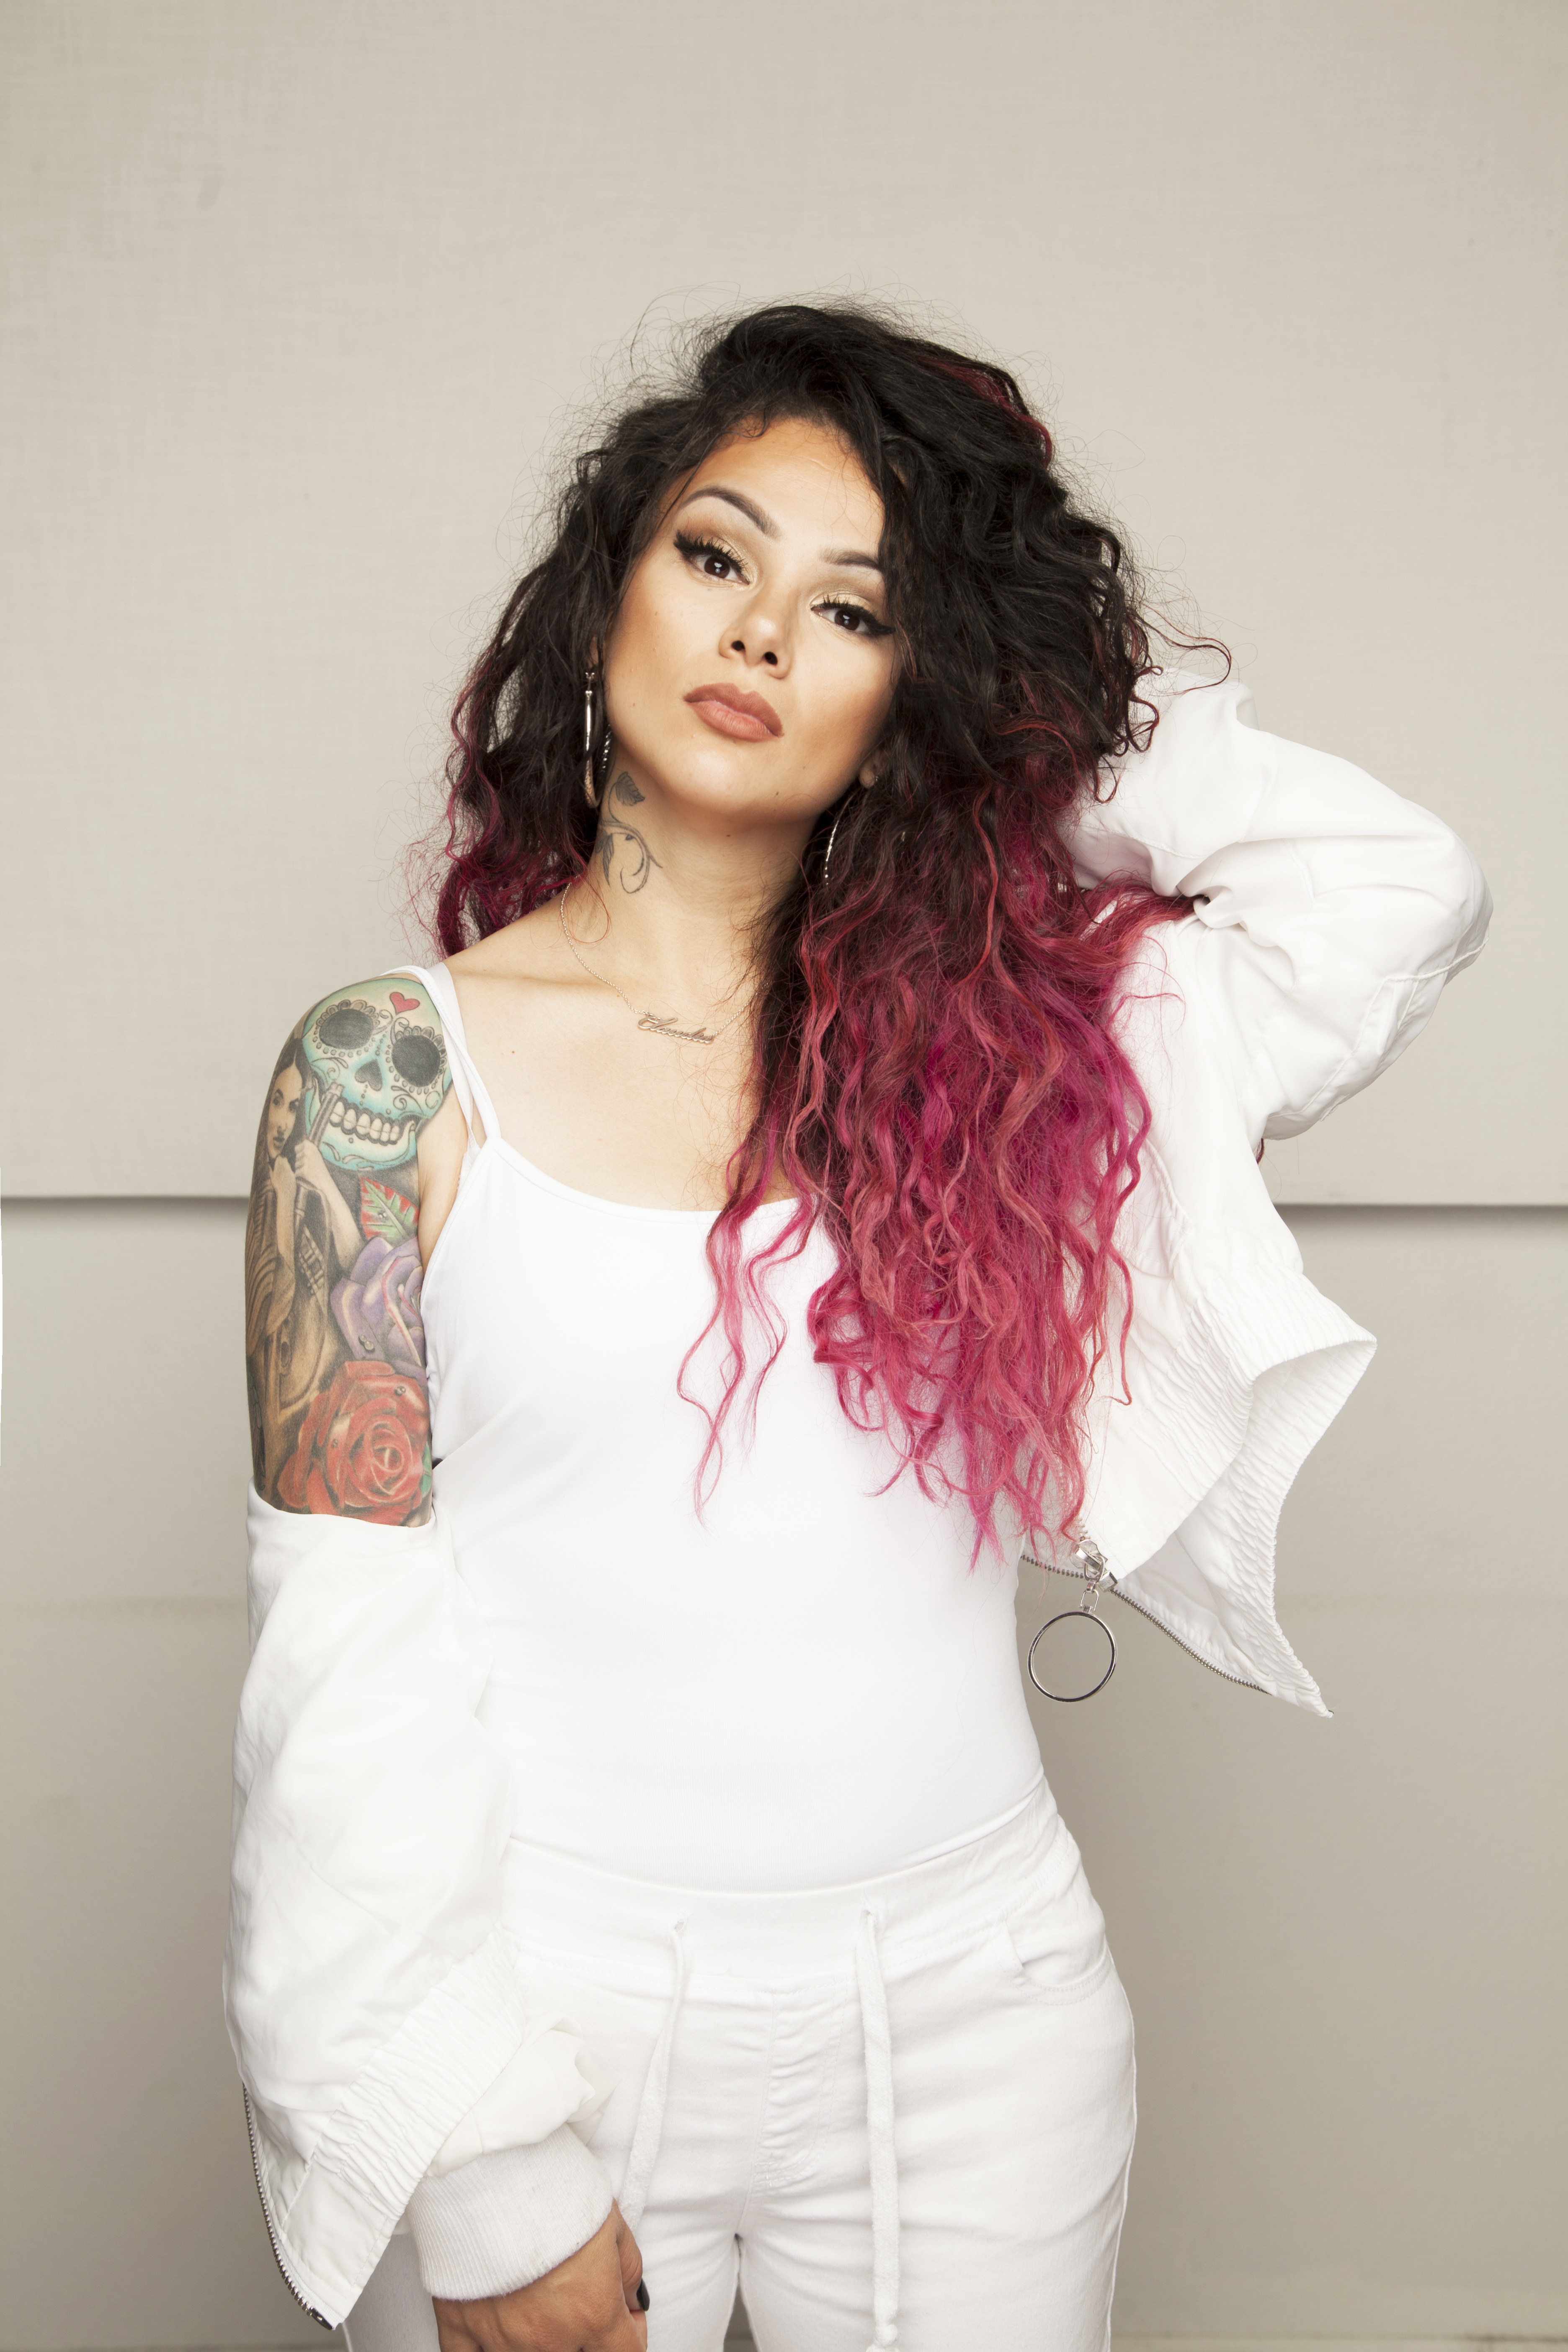 Snow tha Product Creative Loafing